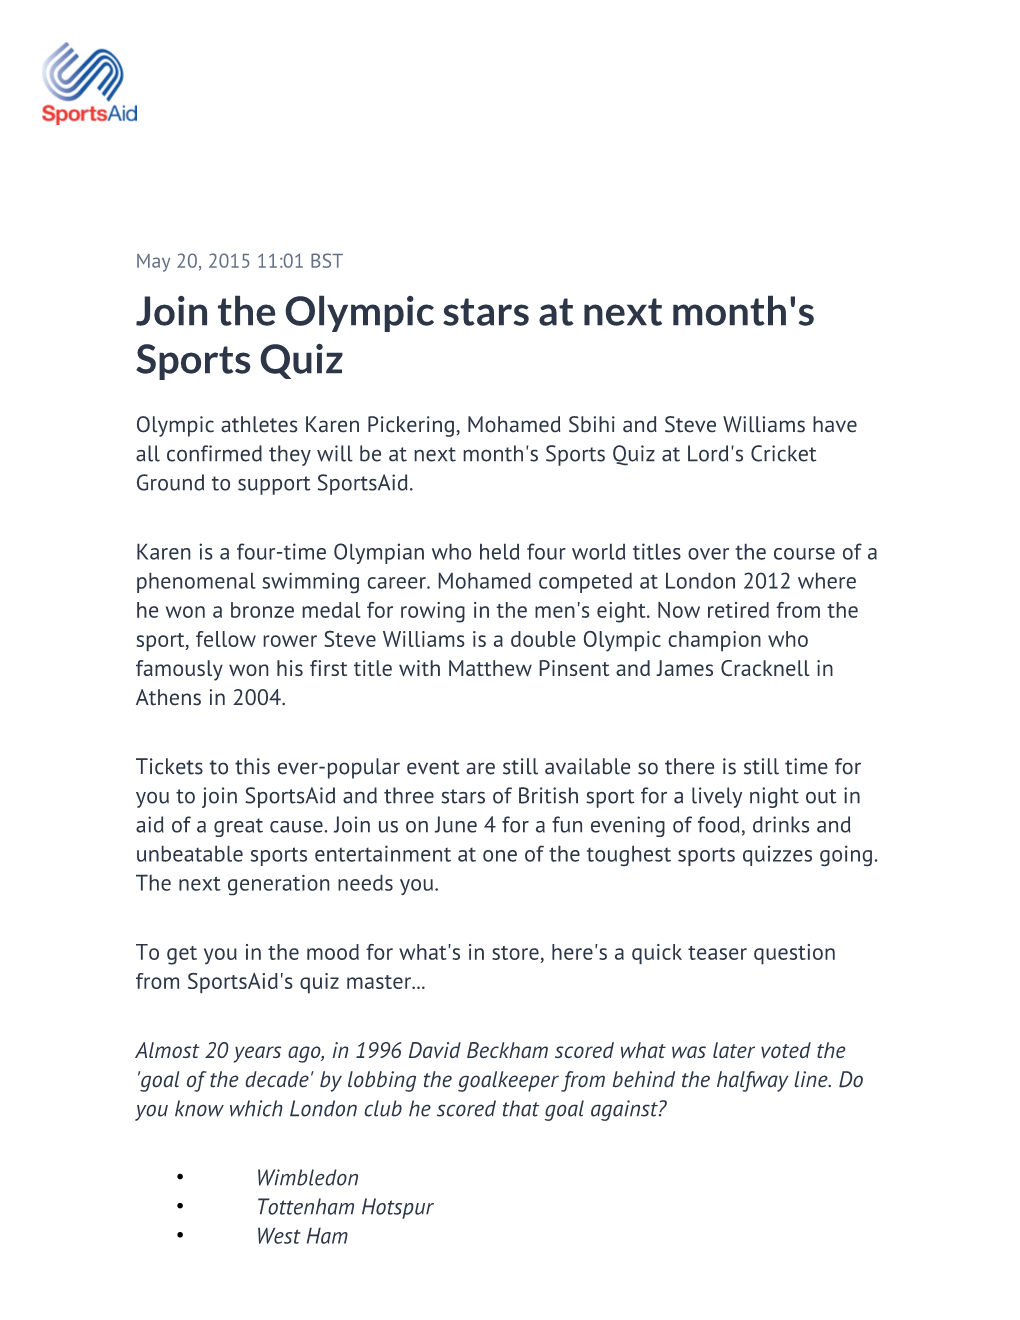 Join the Olympic Stars at Next Month's Sports Quiz